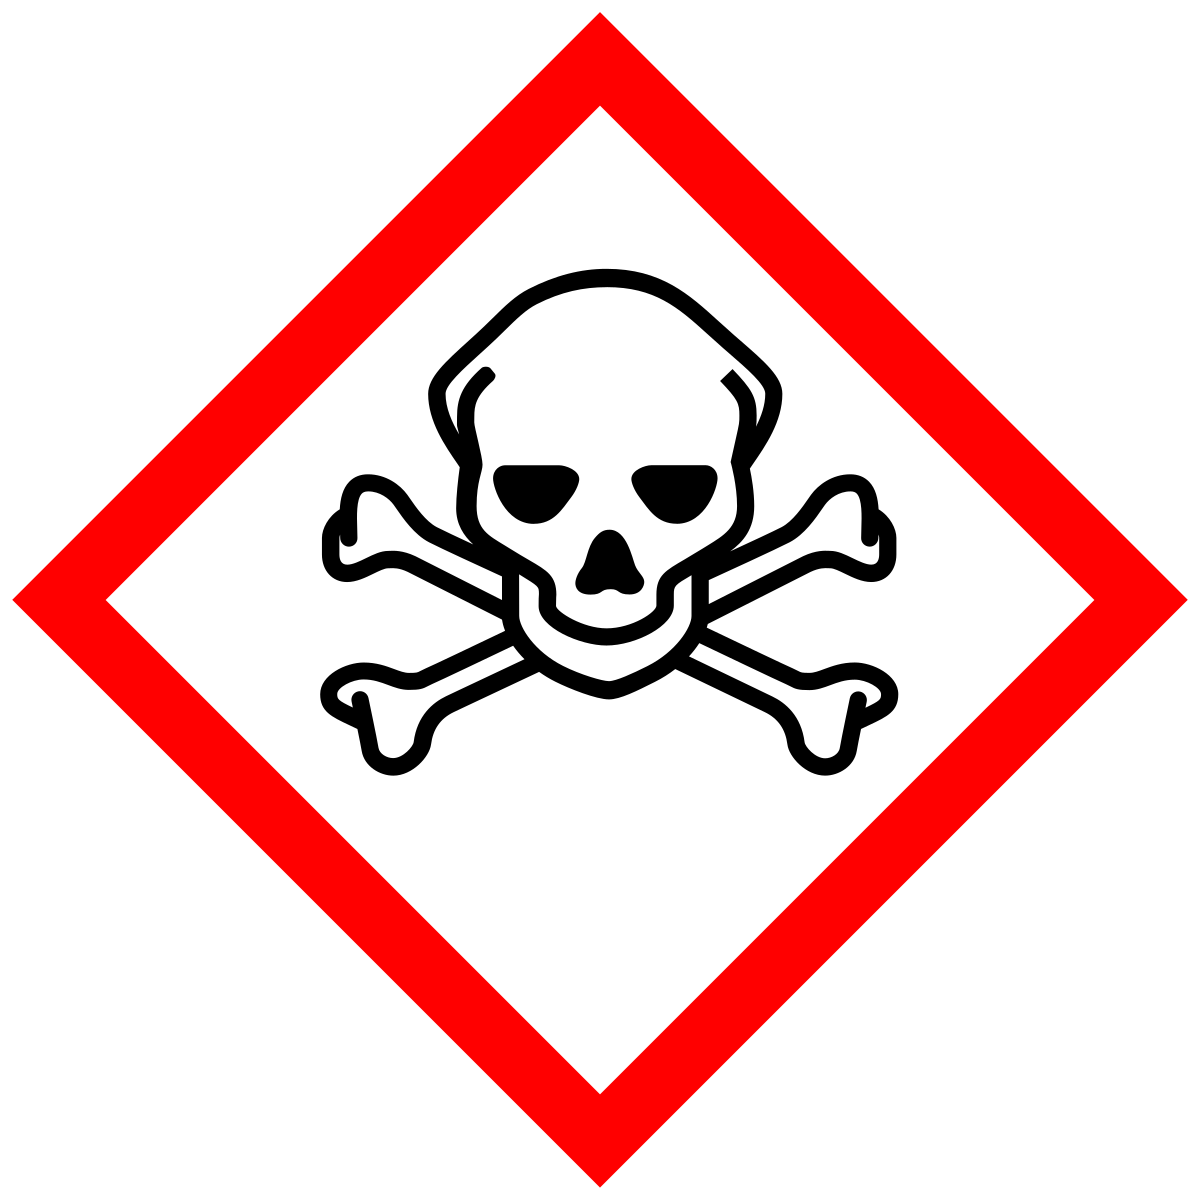 Warning sign with a crossed-out malware symbol